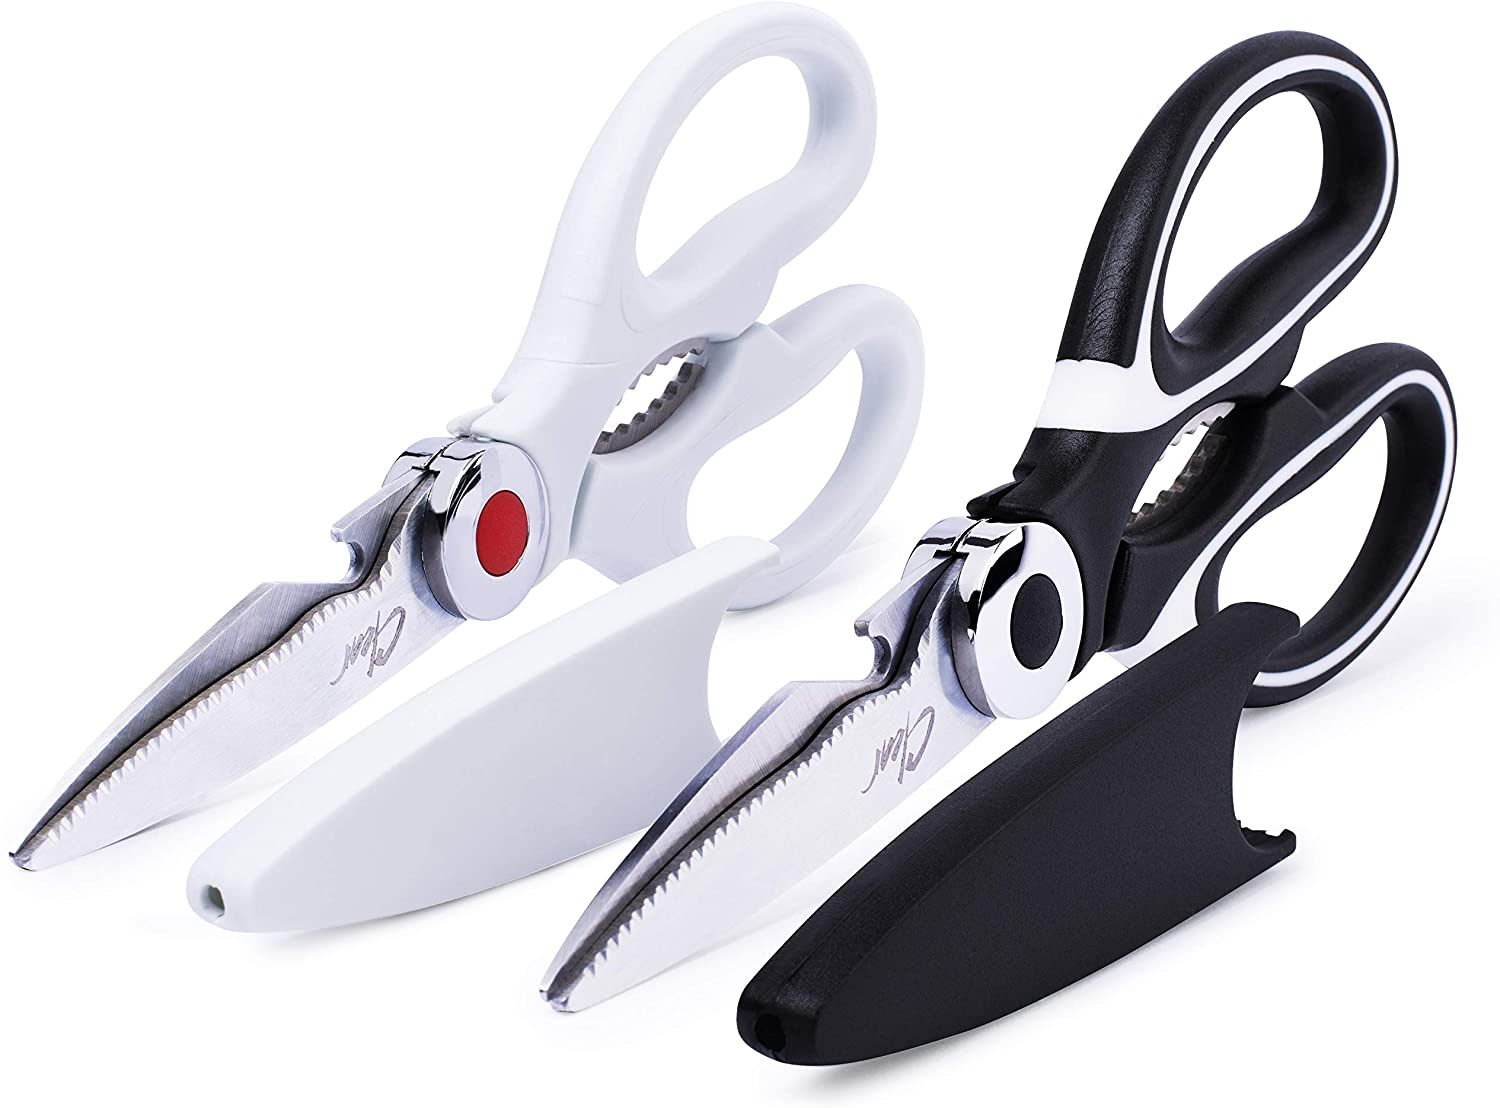 Kitchen Shears by Clear Style, Multipurpose Stainless Scissors-Steel Cooking Shears, Dishwasher Safe, Perfect for Preparing Beef, Chicken, Vegetables, Fish, and More, Black and White (2 Pack)